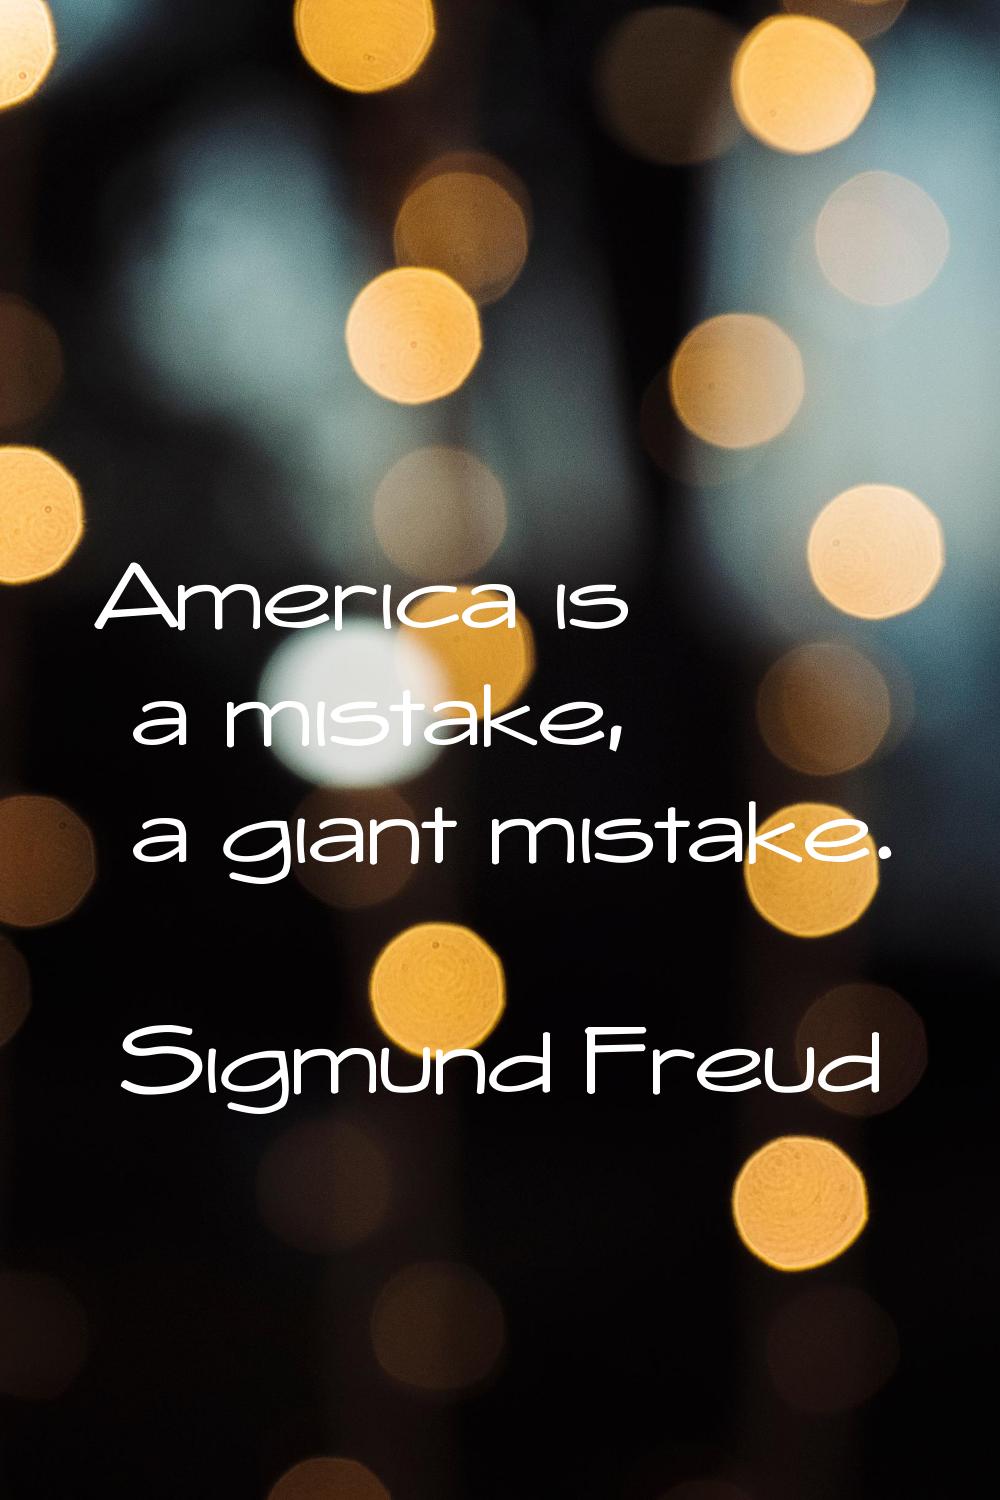 America is a mistake, a giant mistake.